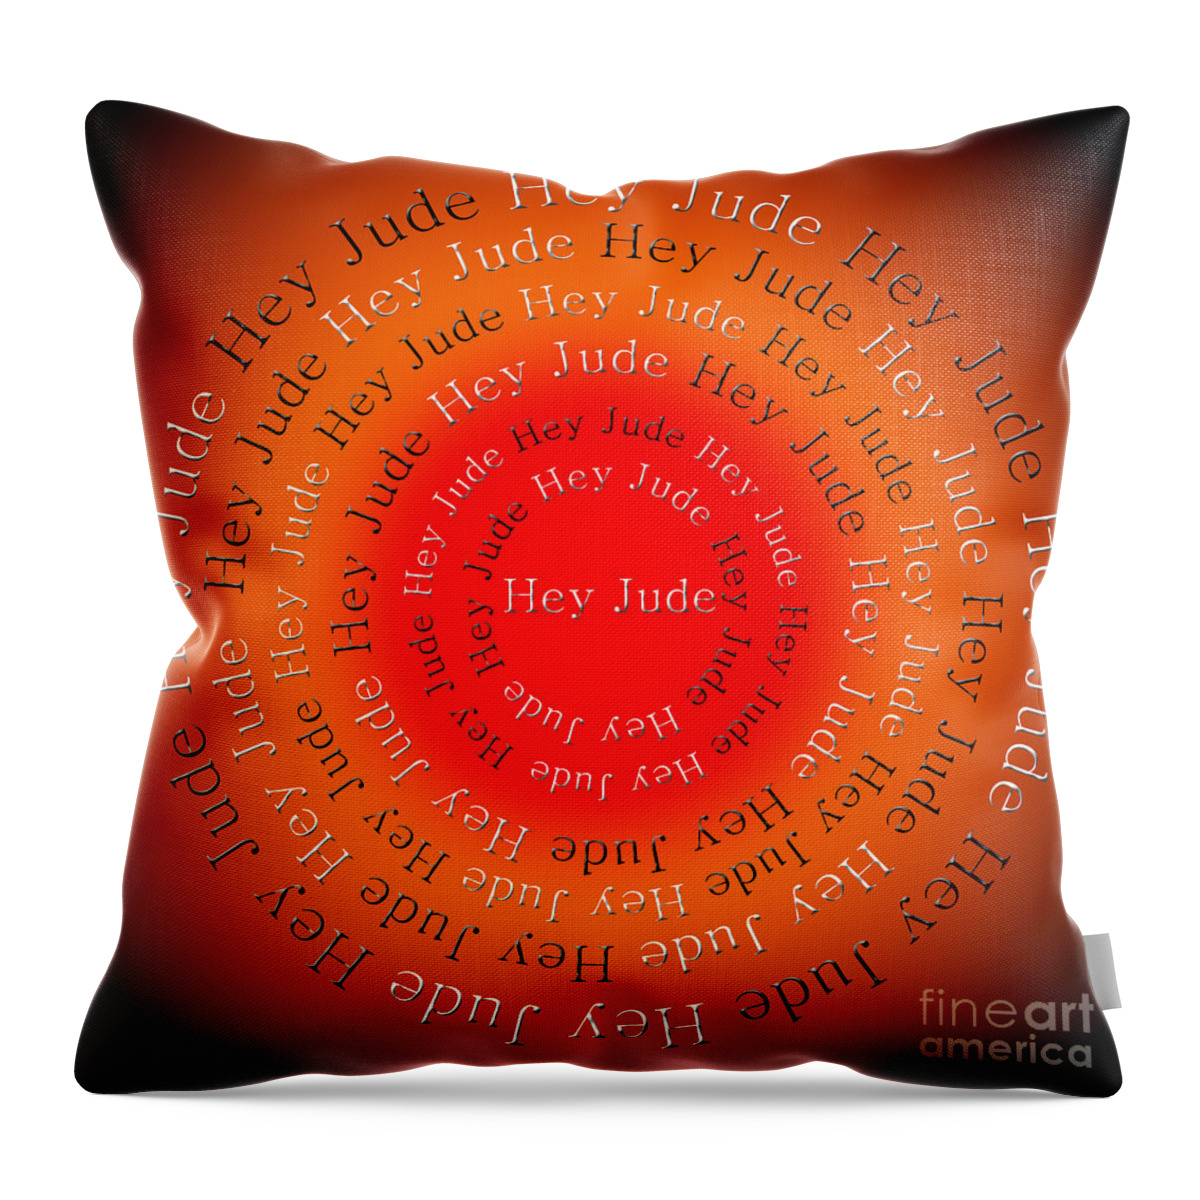 Hey Jude Throw Pillow featuring the digital art Hey Jude 2 by Andee Design